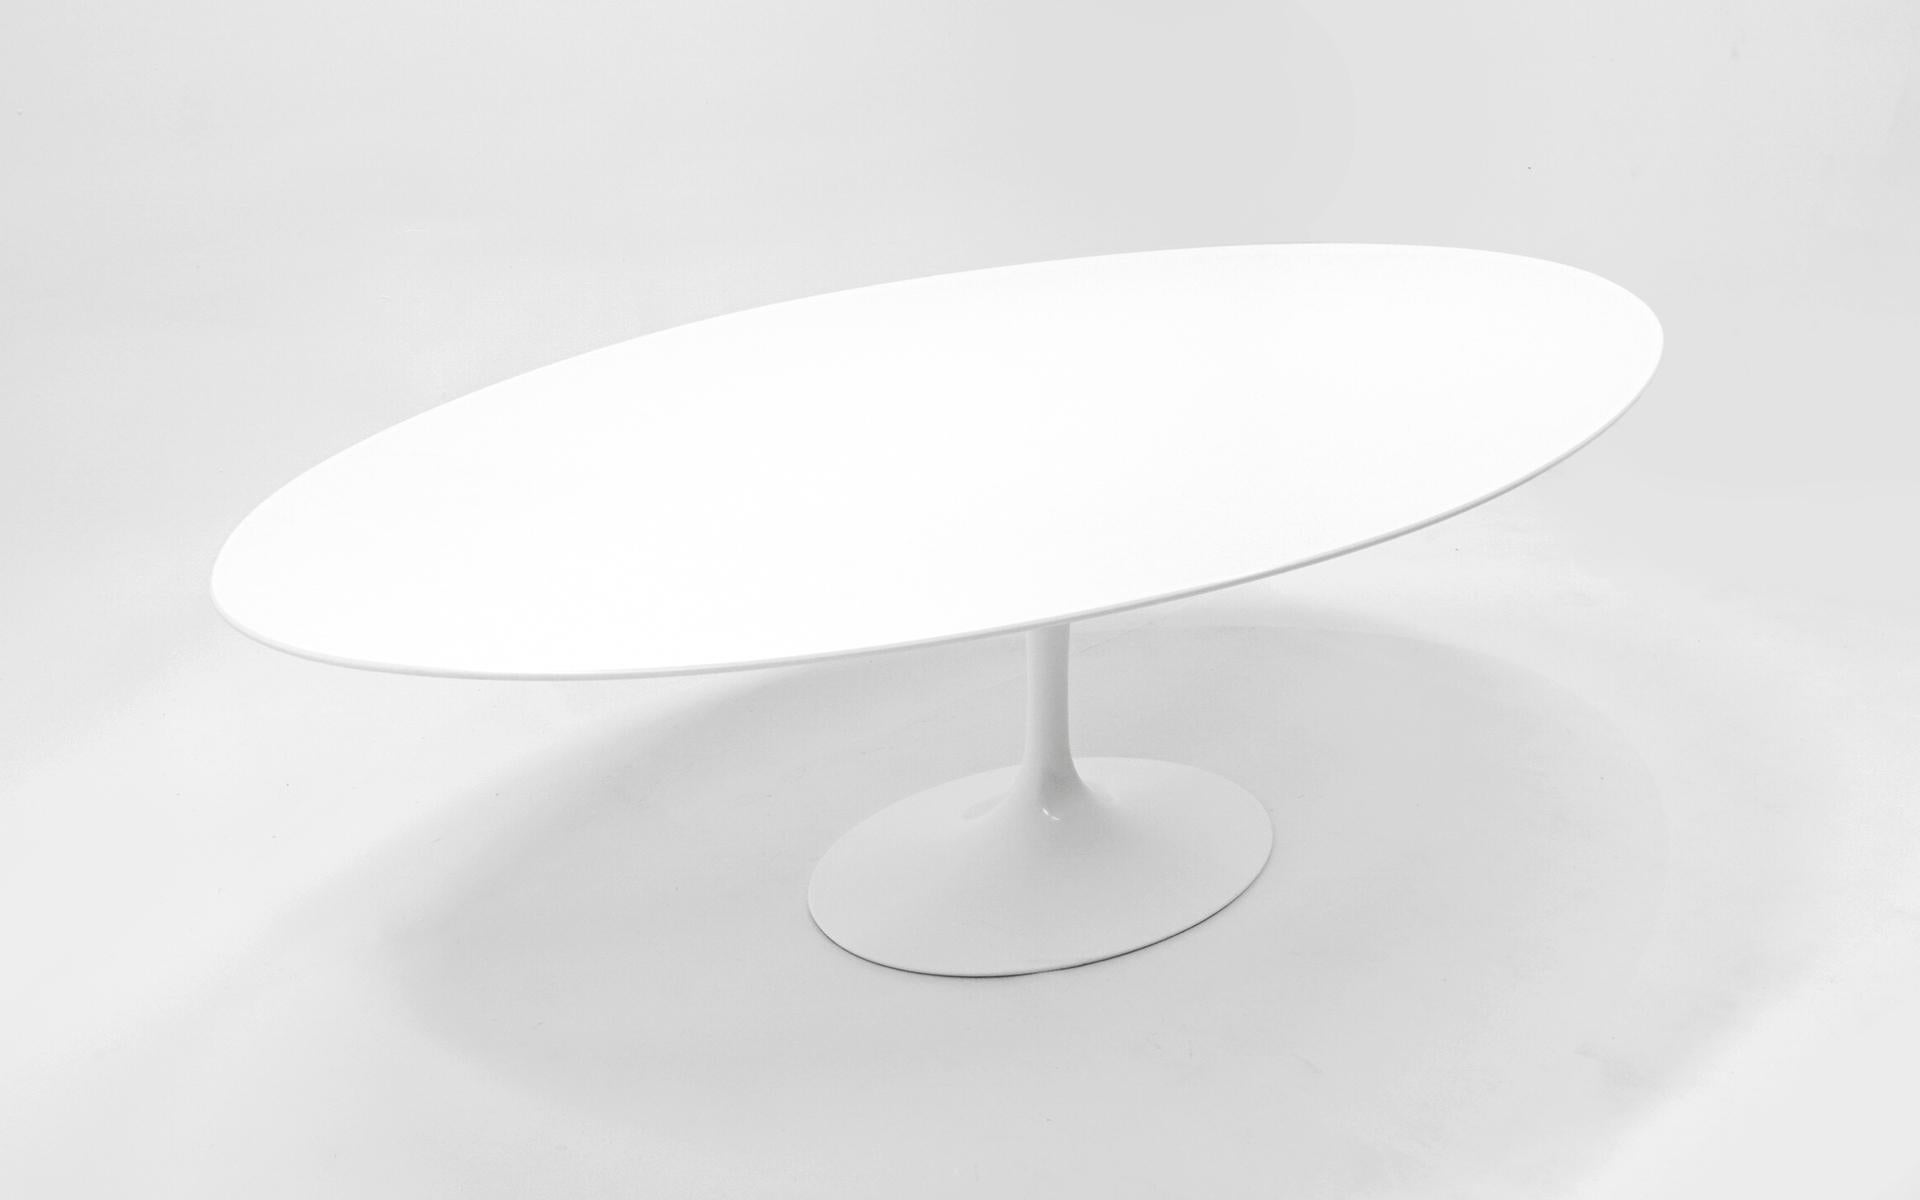 Oval dining / conference table with white laminate top and white lacquered aluminum tulip base designed by Eero Saarinen for Knoll.  This is the largest table from this line. This table was produced in the 2000s by Knoll and is in virtually like new